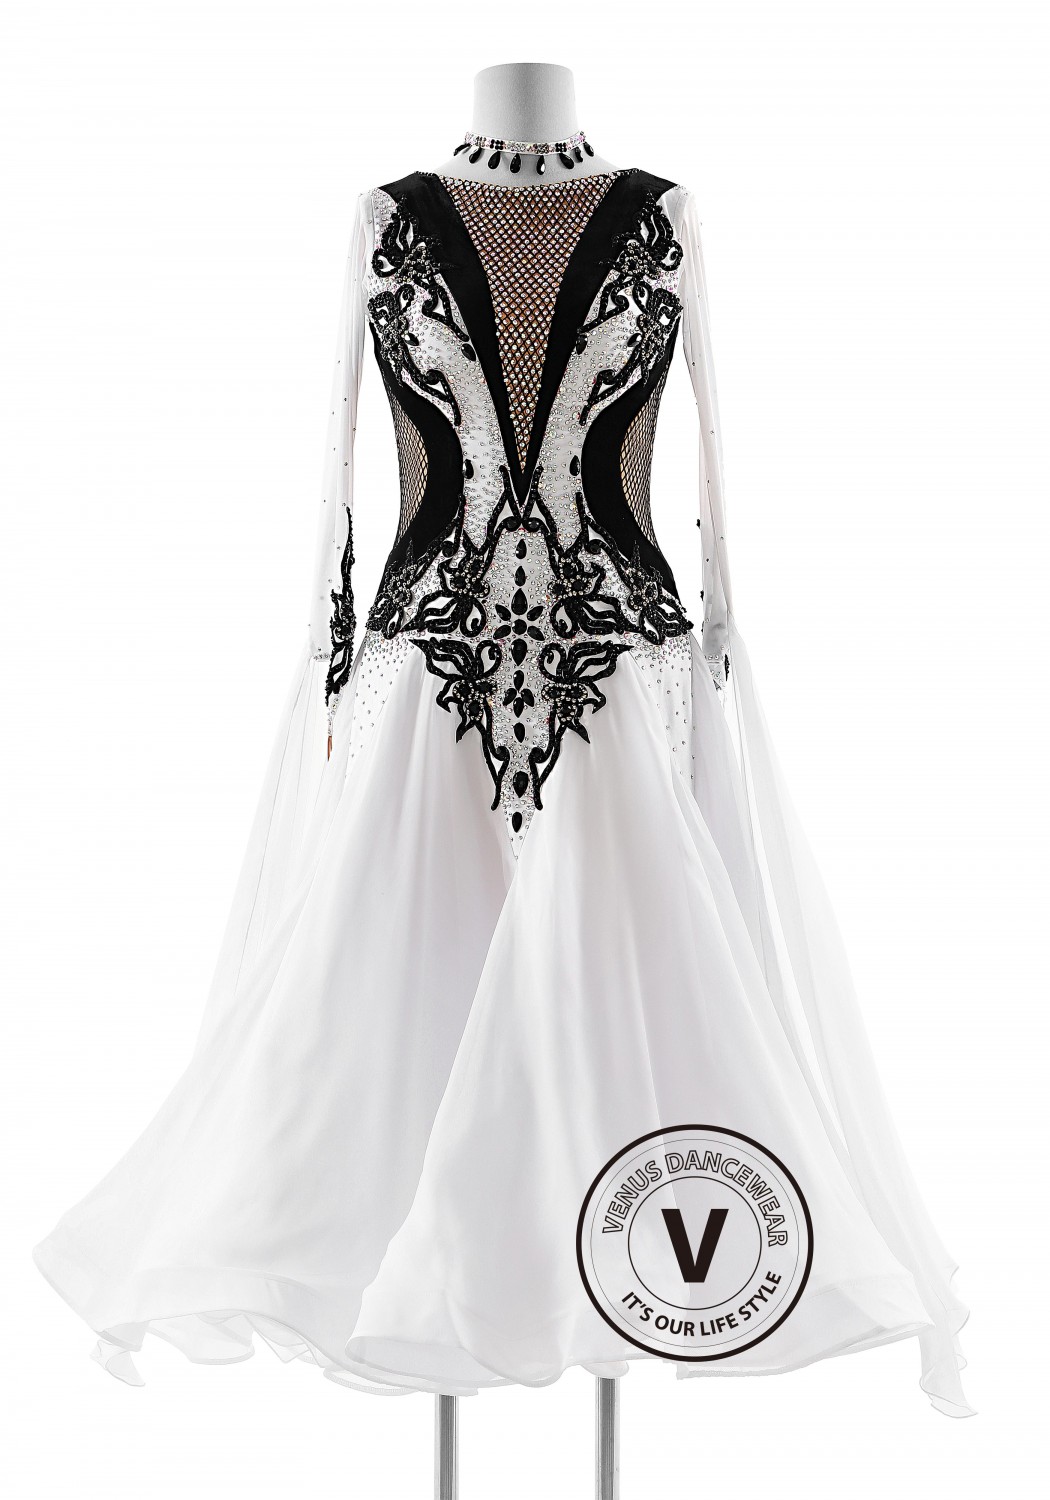 White Color Dress with Black Velvet Decorated Ballroom Smooth Competition Dance Dress